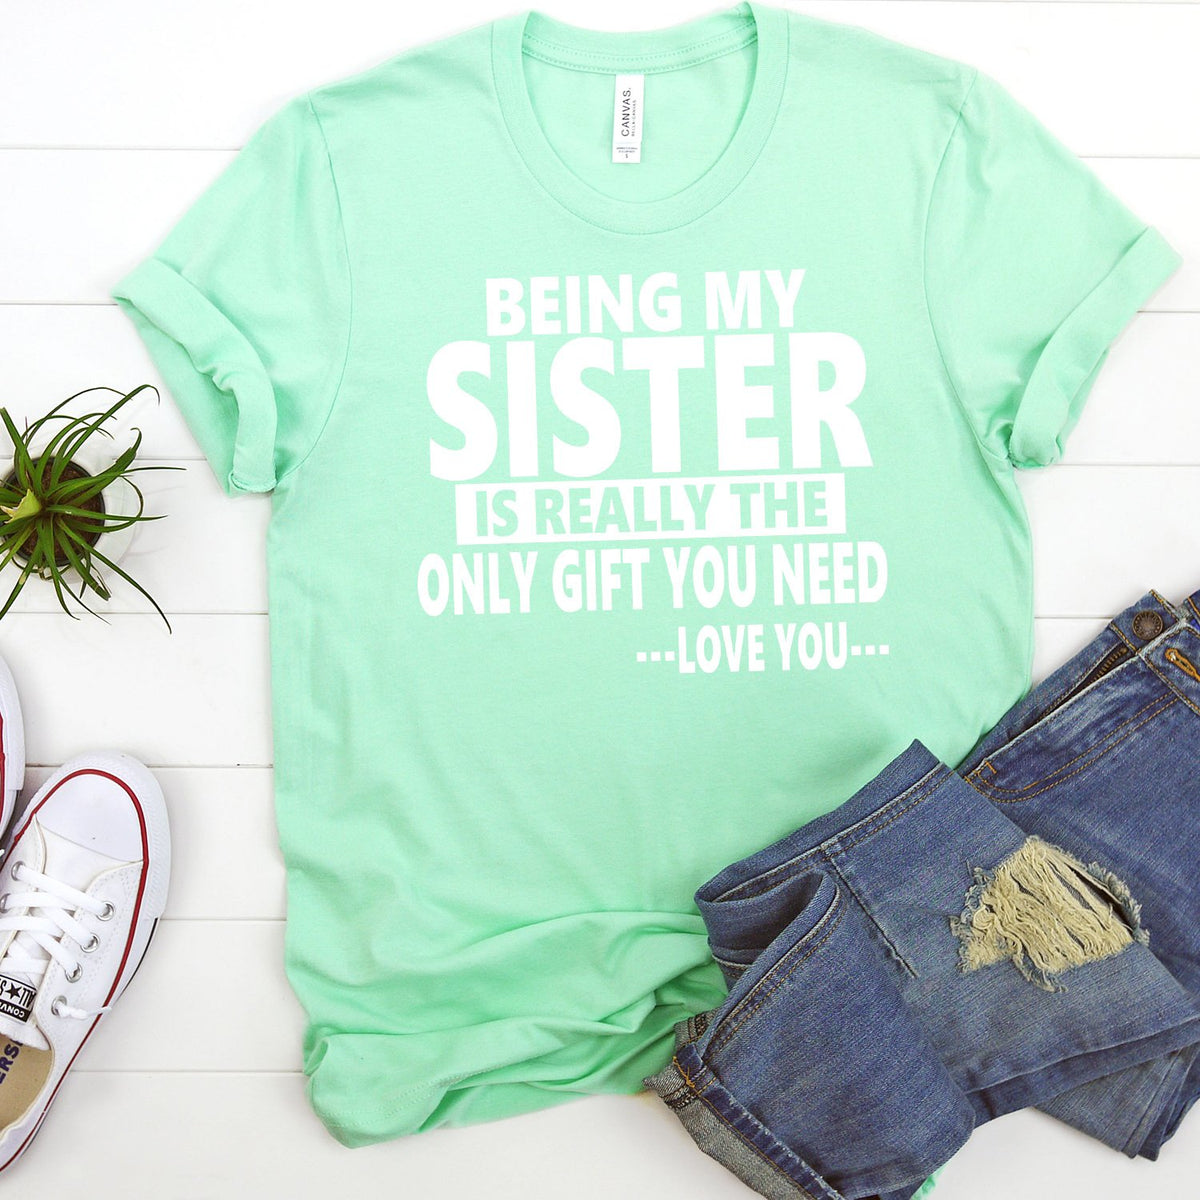 Being My Sister is Really The Only Gift You Need...Love You... - Short Sleeve Tee Shirt